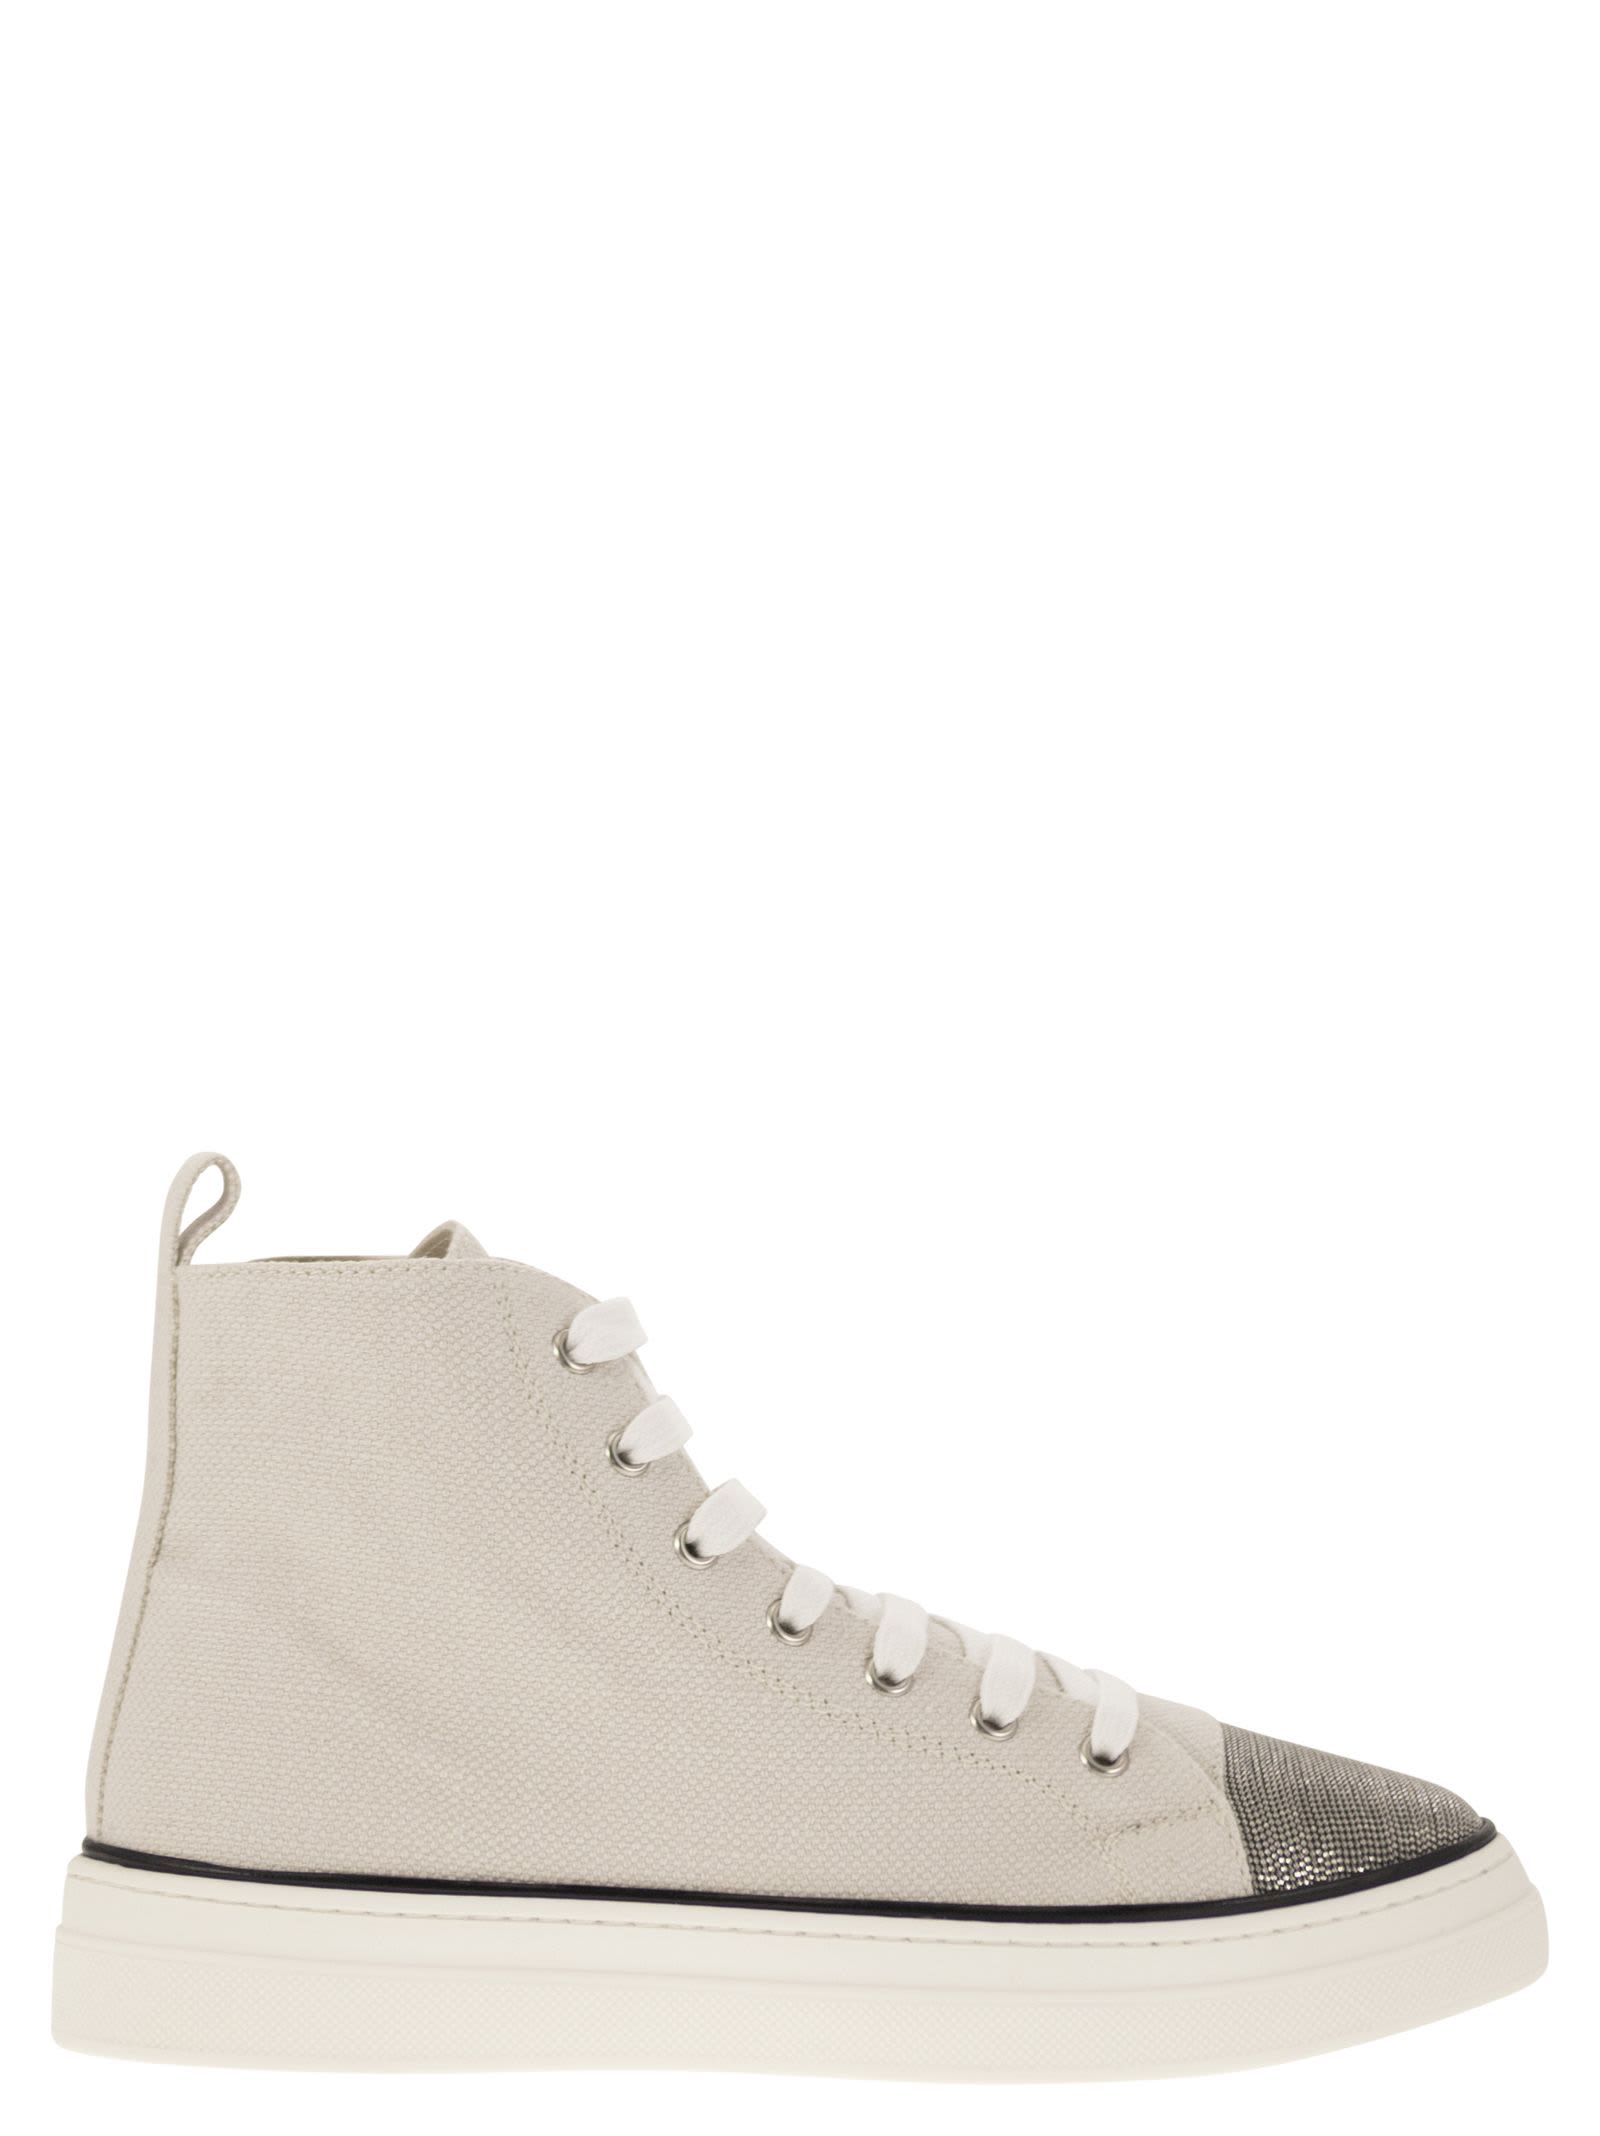 Brunello Cucinelli High-top Sneakers In Cotton And Linen